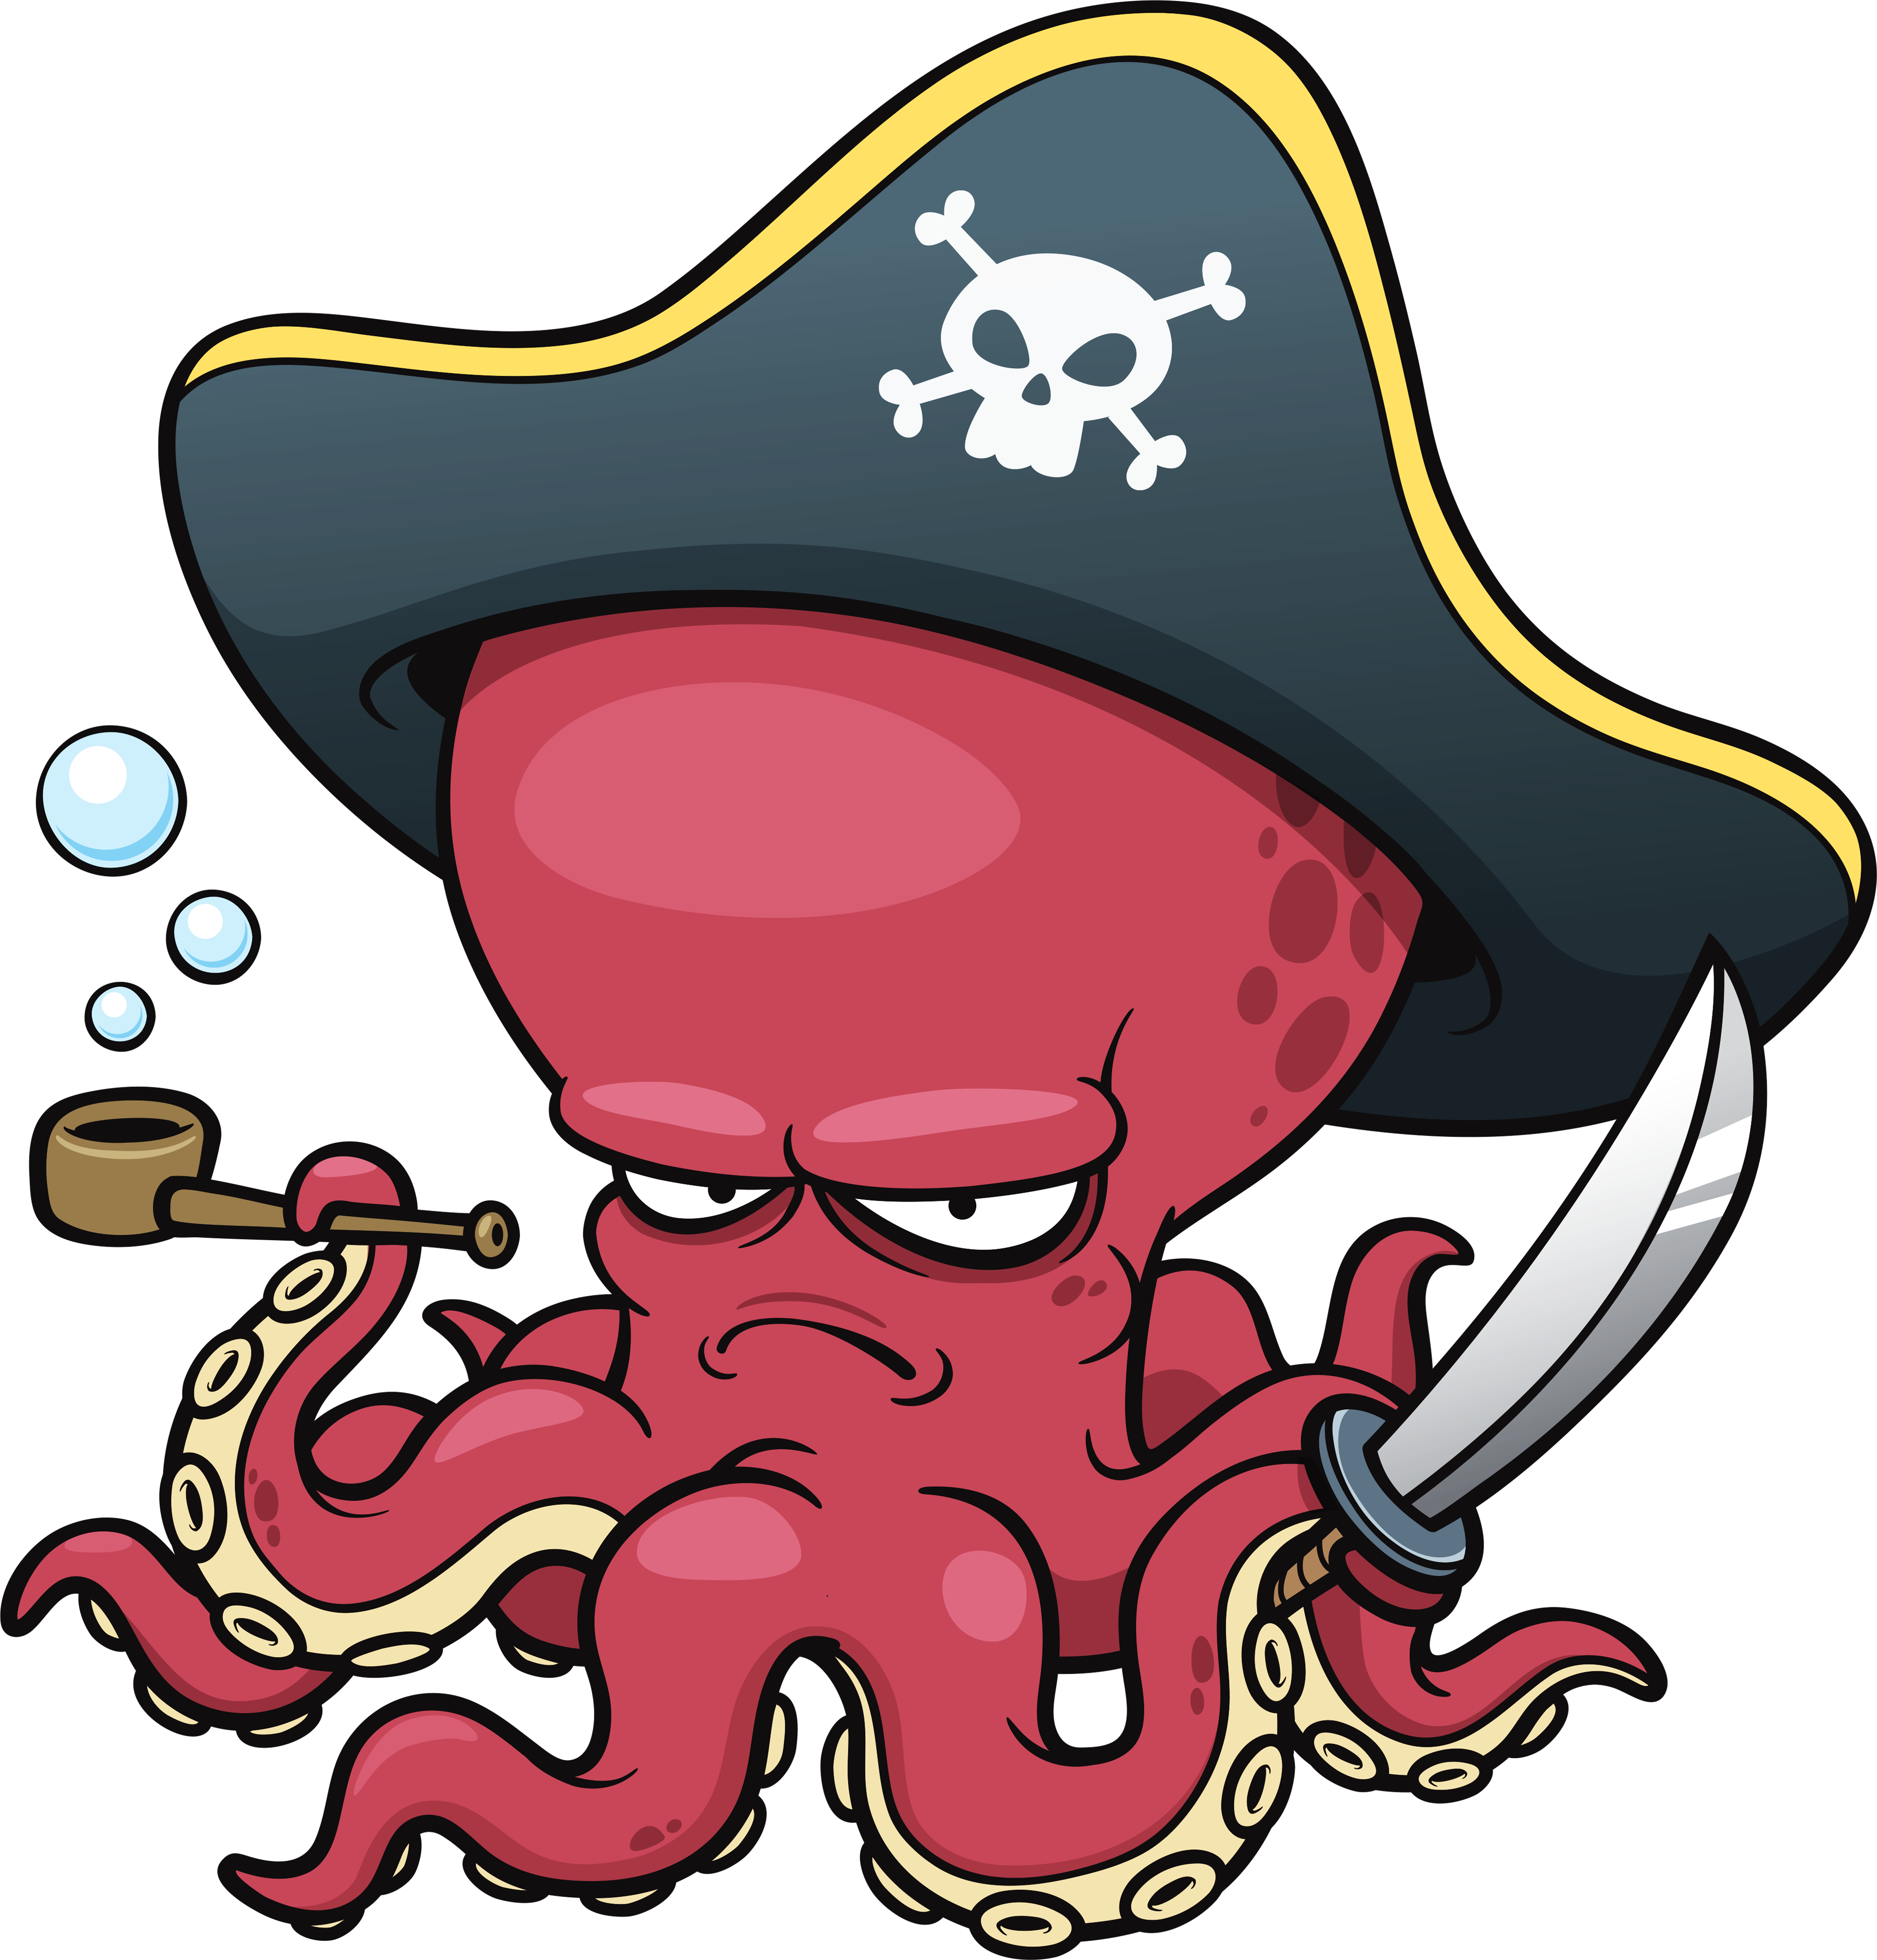 Pirate the art of. Pirates clipart octopus